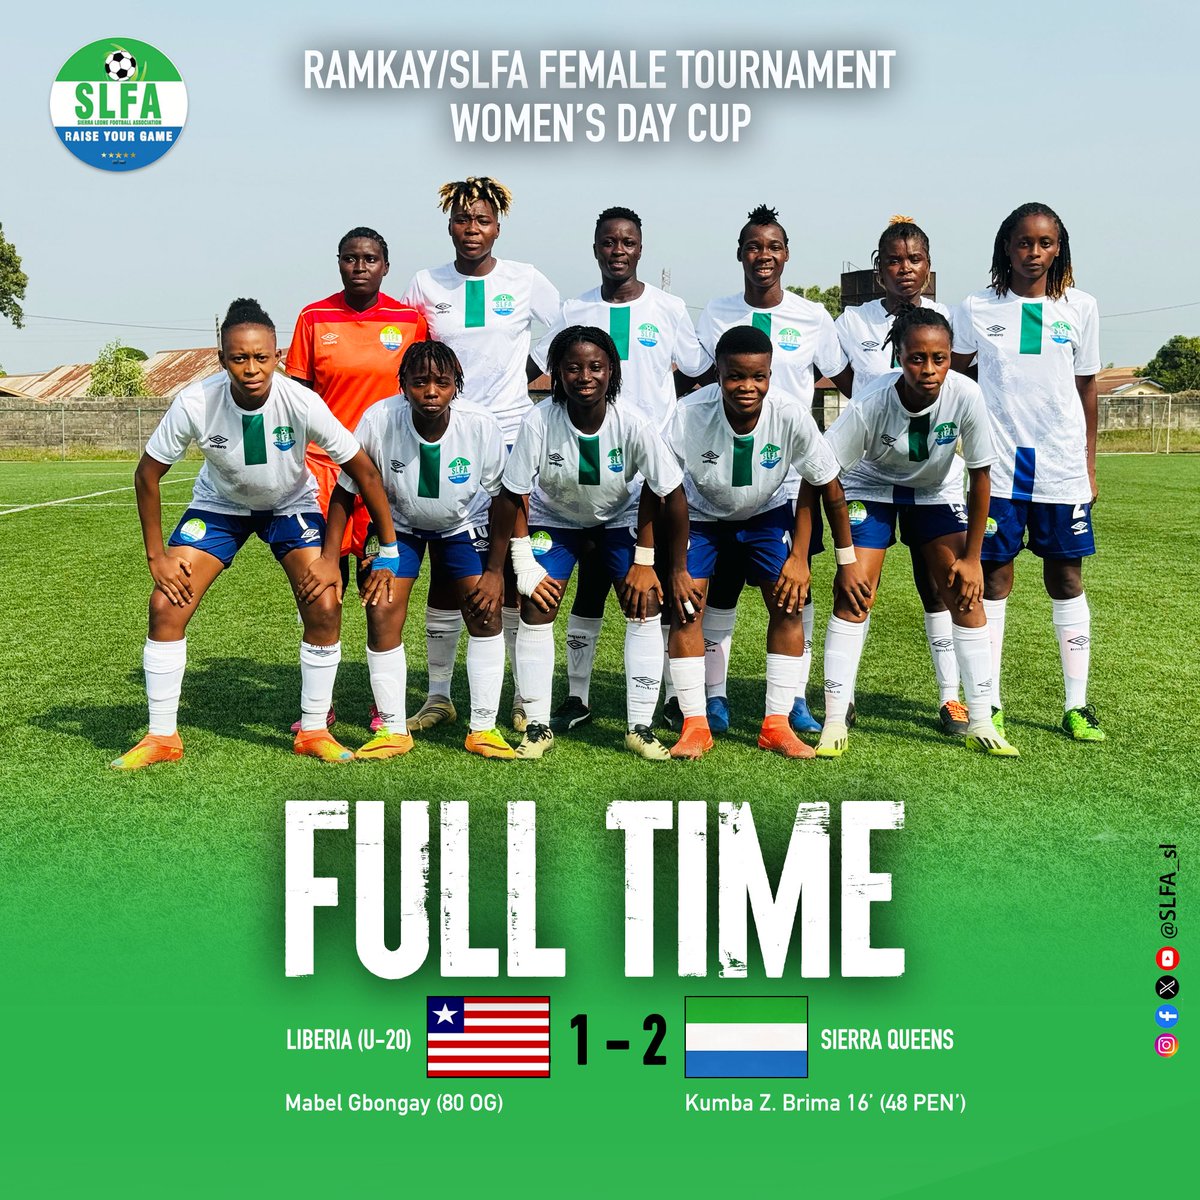 Sierra Queens triumphed in their first game of the Women’s Day Cup, securing a thrilling 2-1 victory against Liberia! 🌟 The team's resilience and skill were on full display, setting a strong tone for the tournament ahead. #WomenInSports #SierraQueens #Winners 🎉⚽